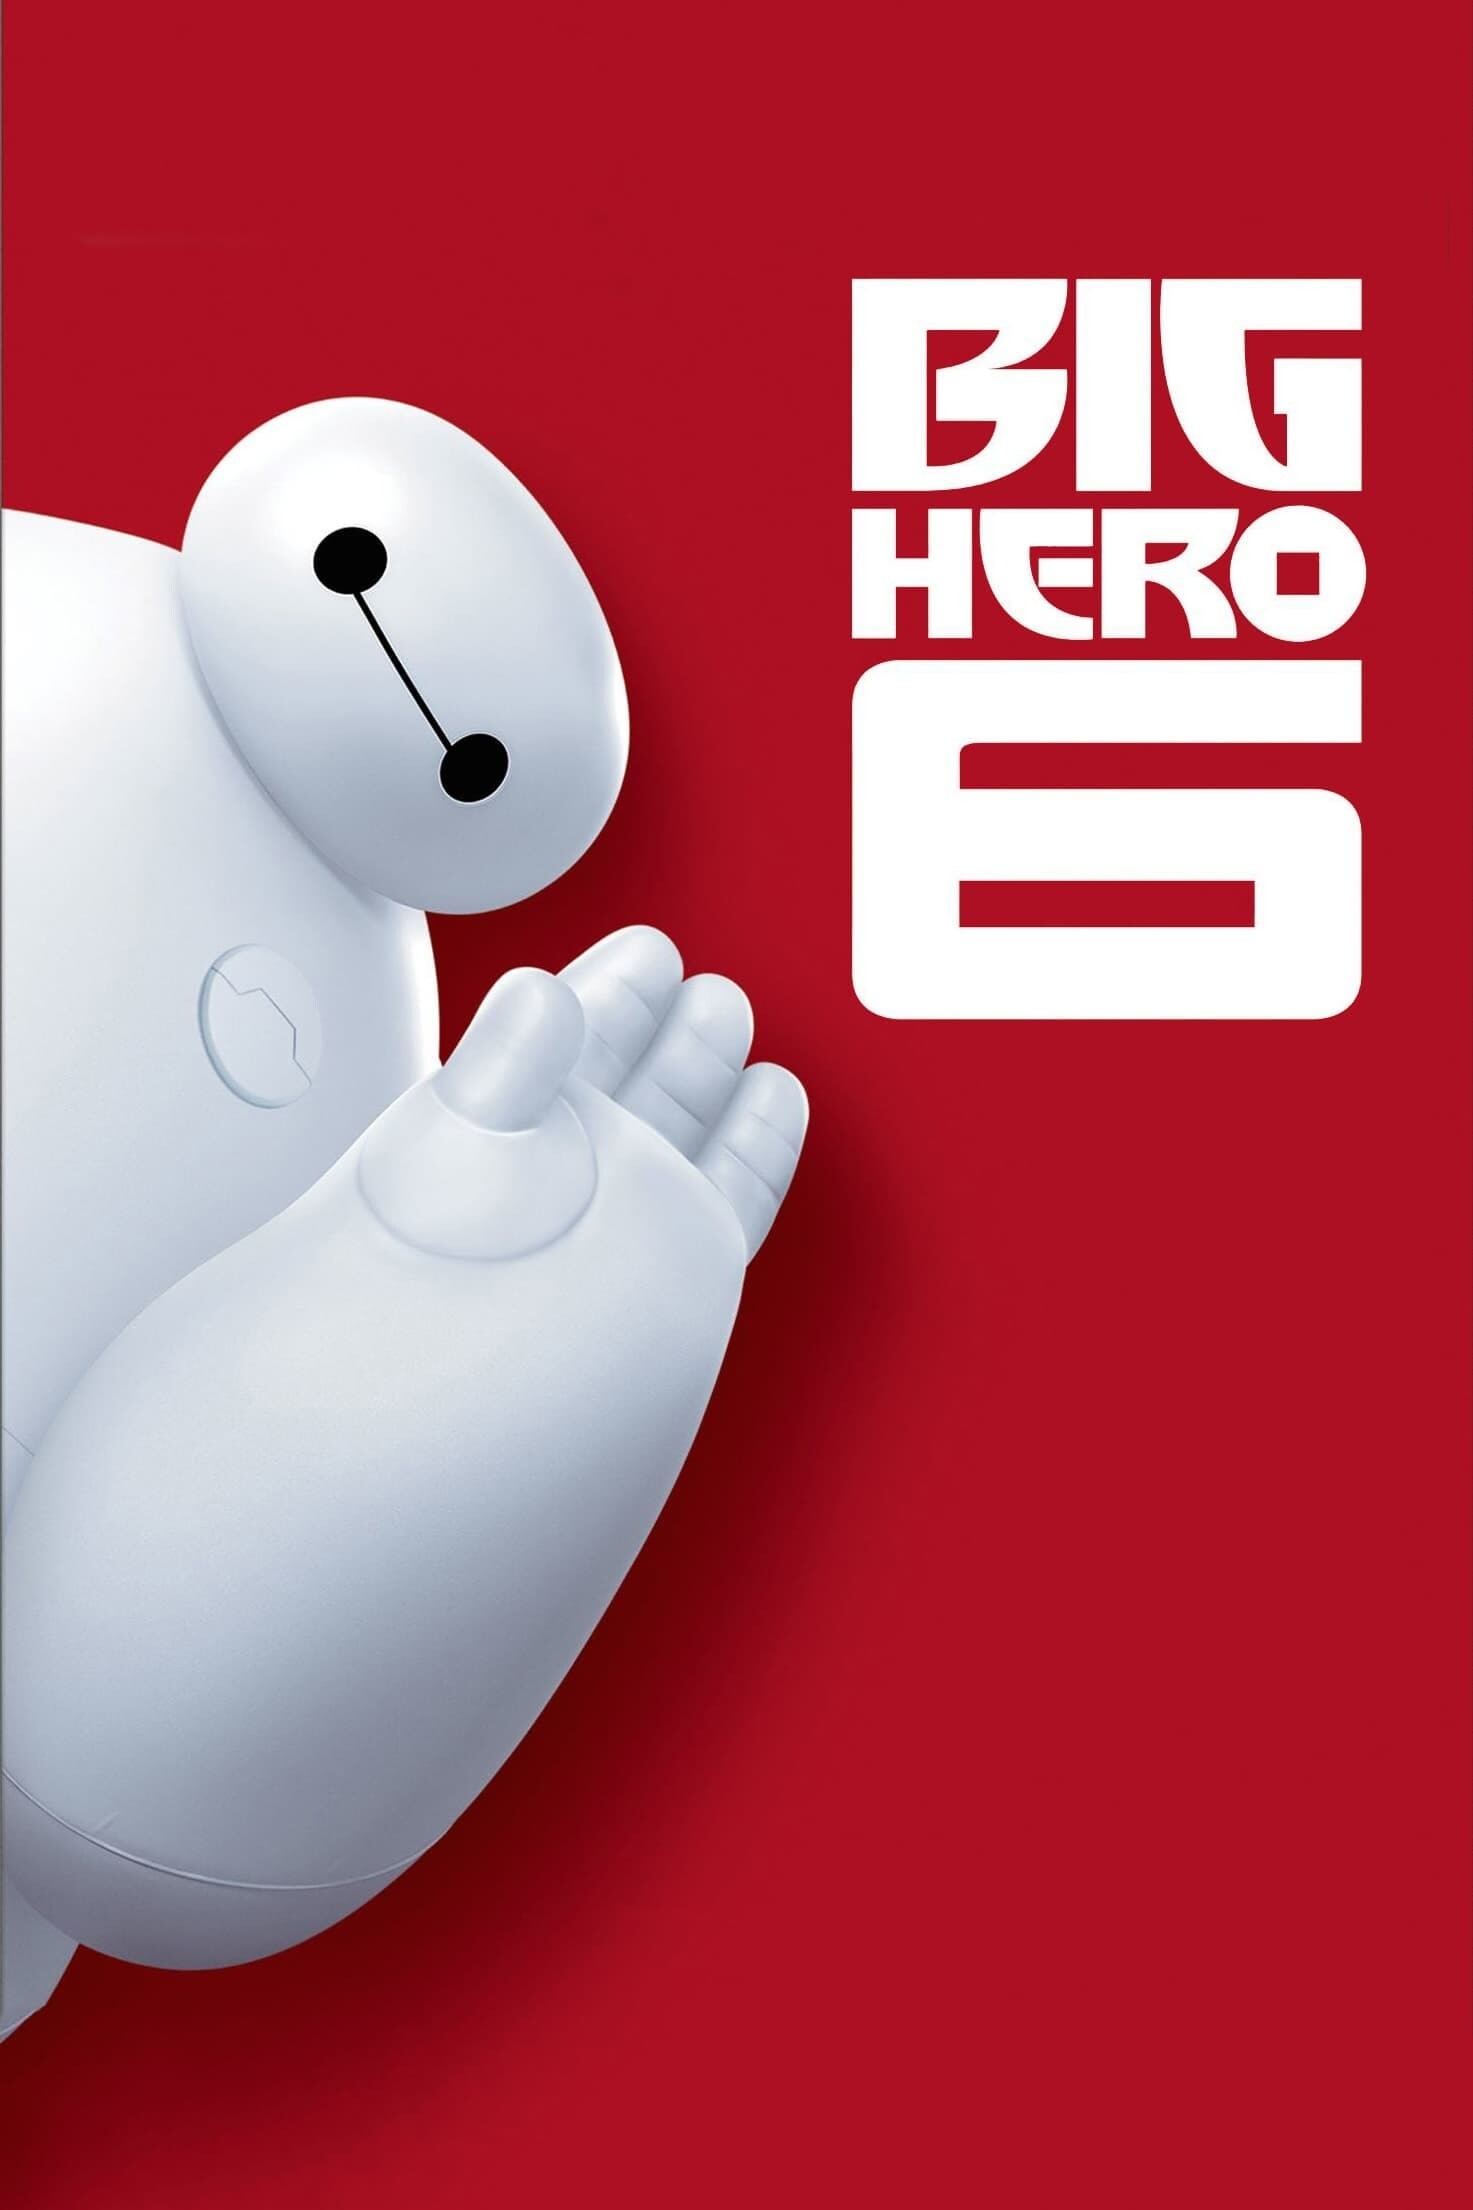 Big Hero 6: Animated film, Won the Academy Award for Best Animated Feature and the Kids' Choice Award for Favorite Animated Movie. 1480x2210 HD Wallpaper.